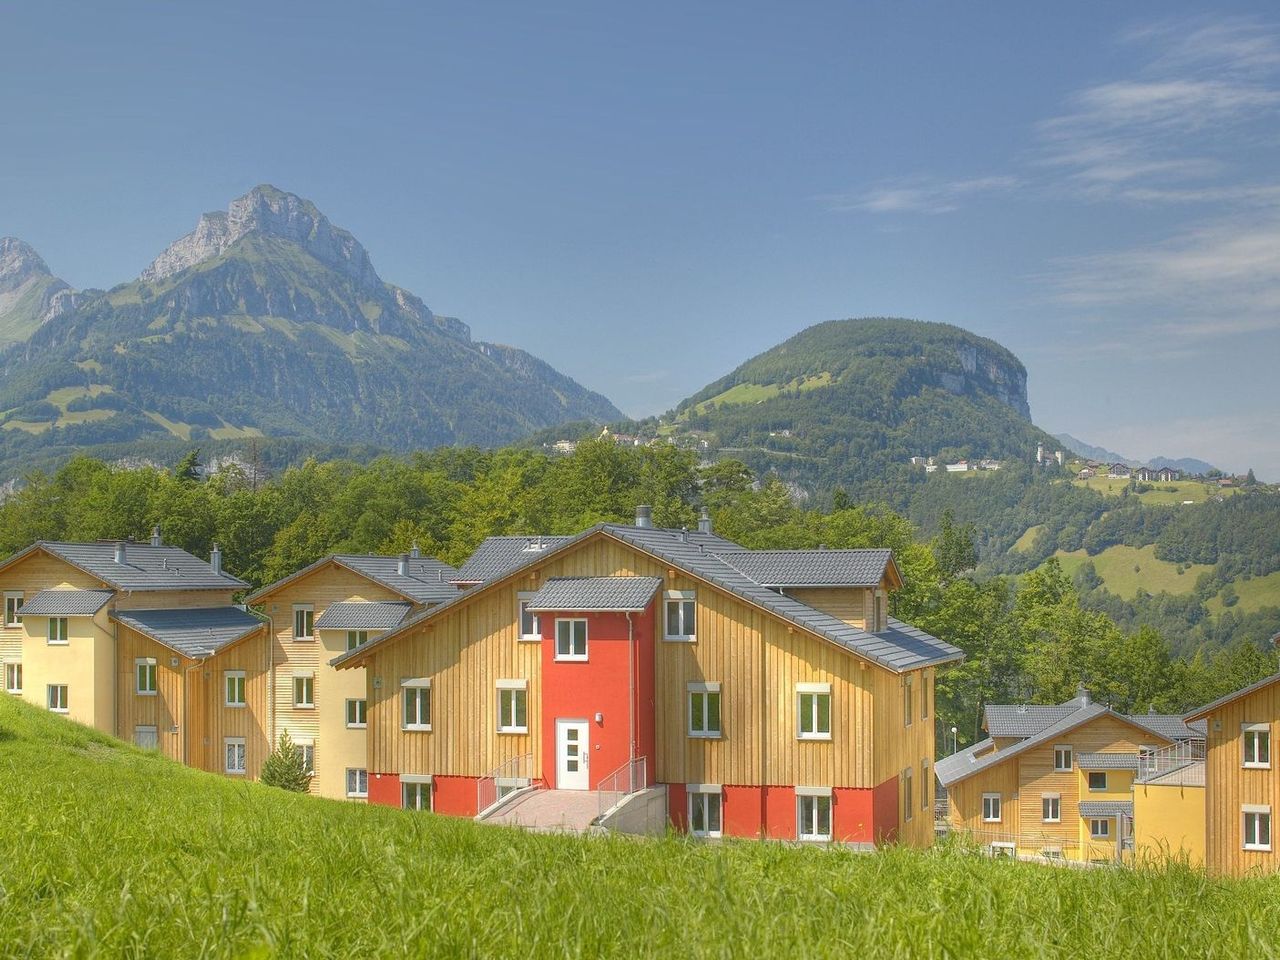 4 Tage Family Vacation im Swiss Holiday Park